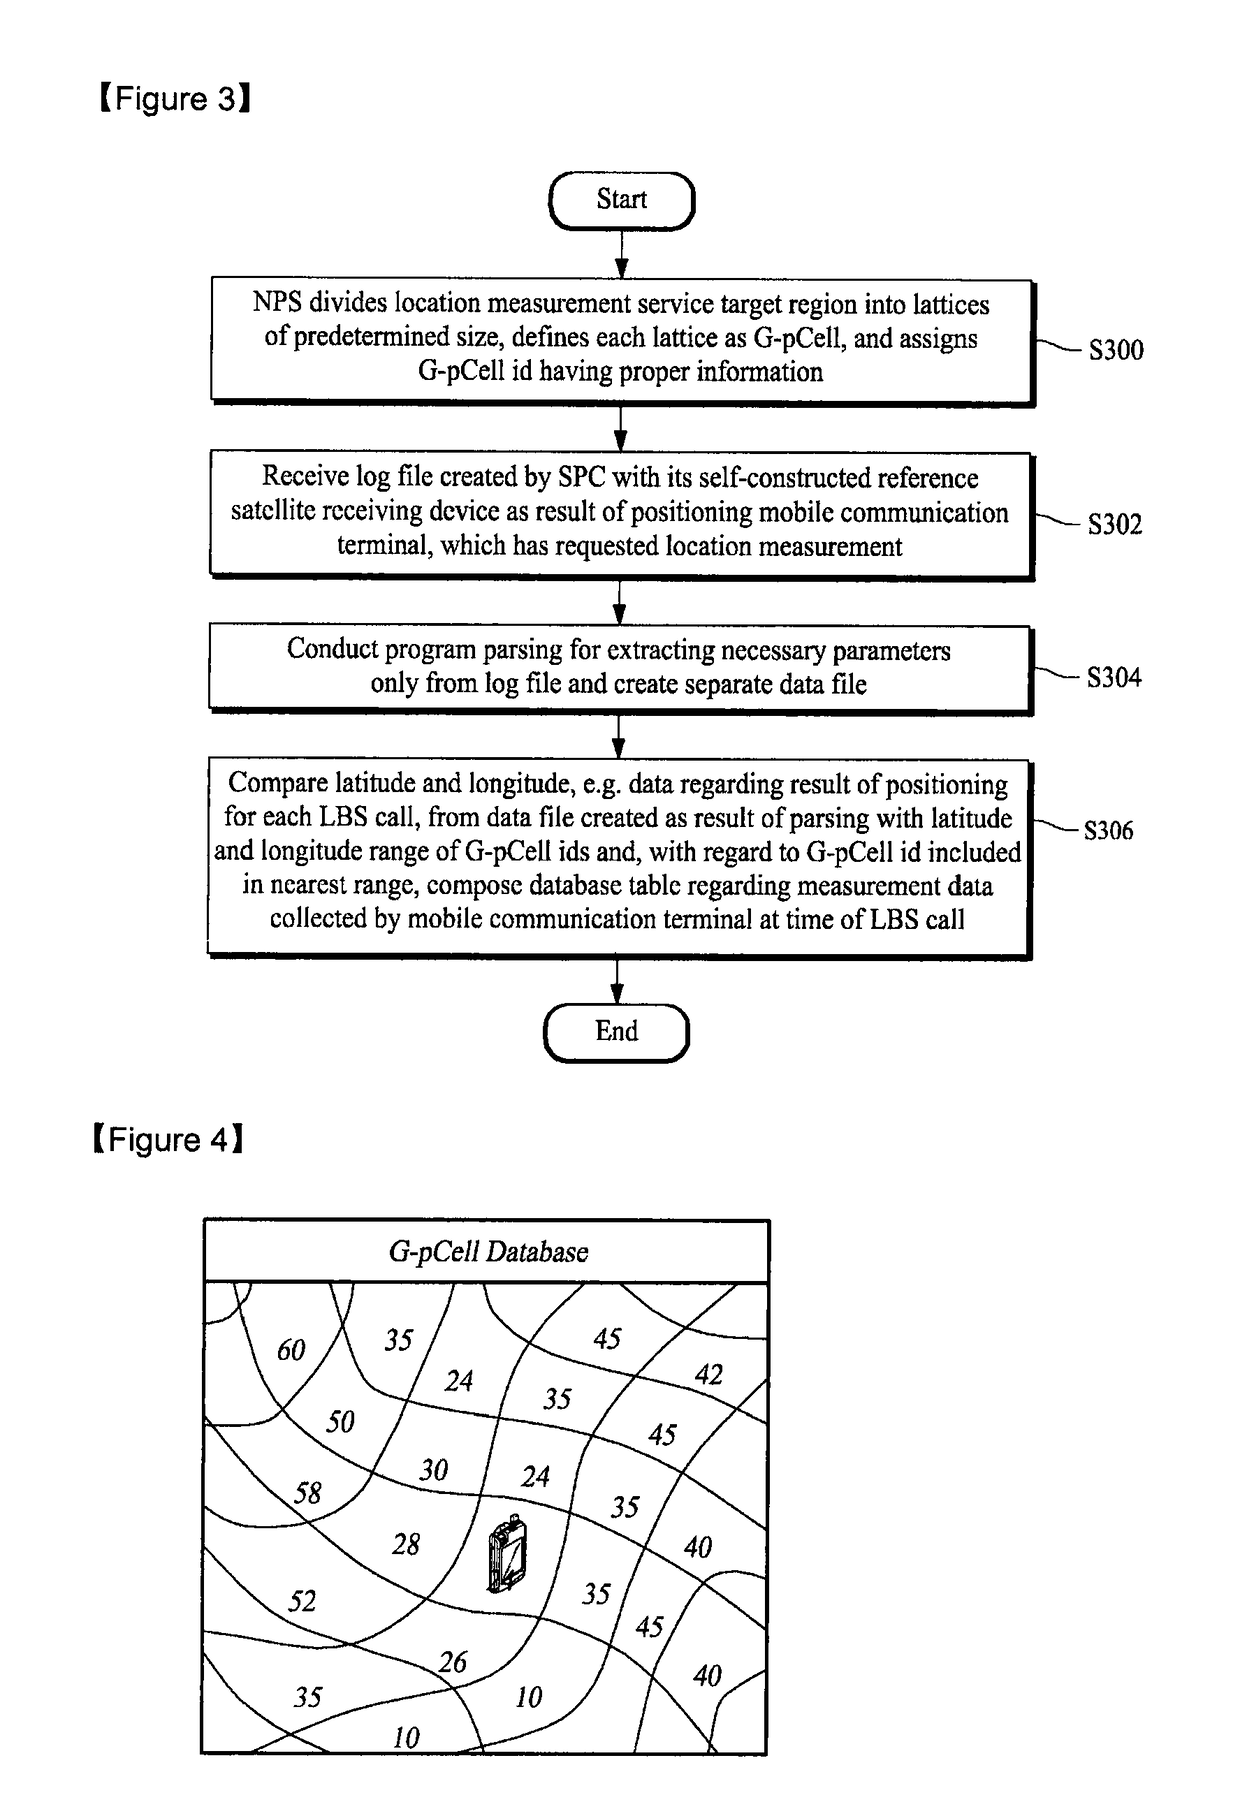 Method and system for providing location measurement of network based to mobile communication terminal by using G-pCell database according to location